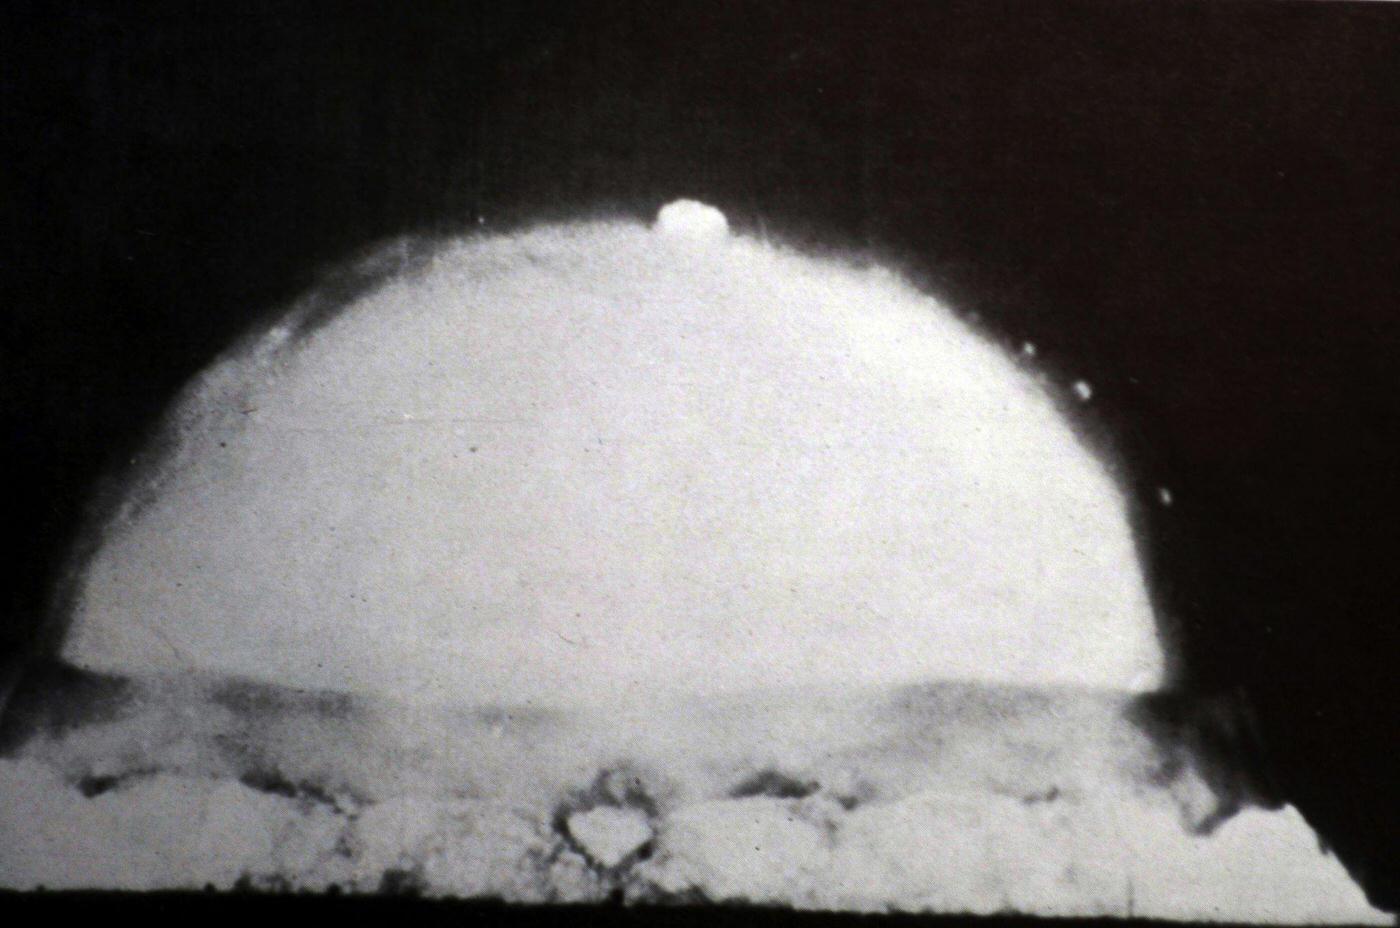 First detonation of a nuclear device - Trinity - in New Mexico, 1945